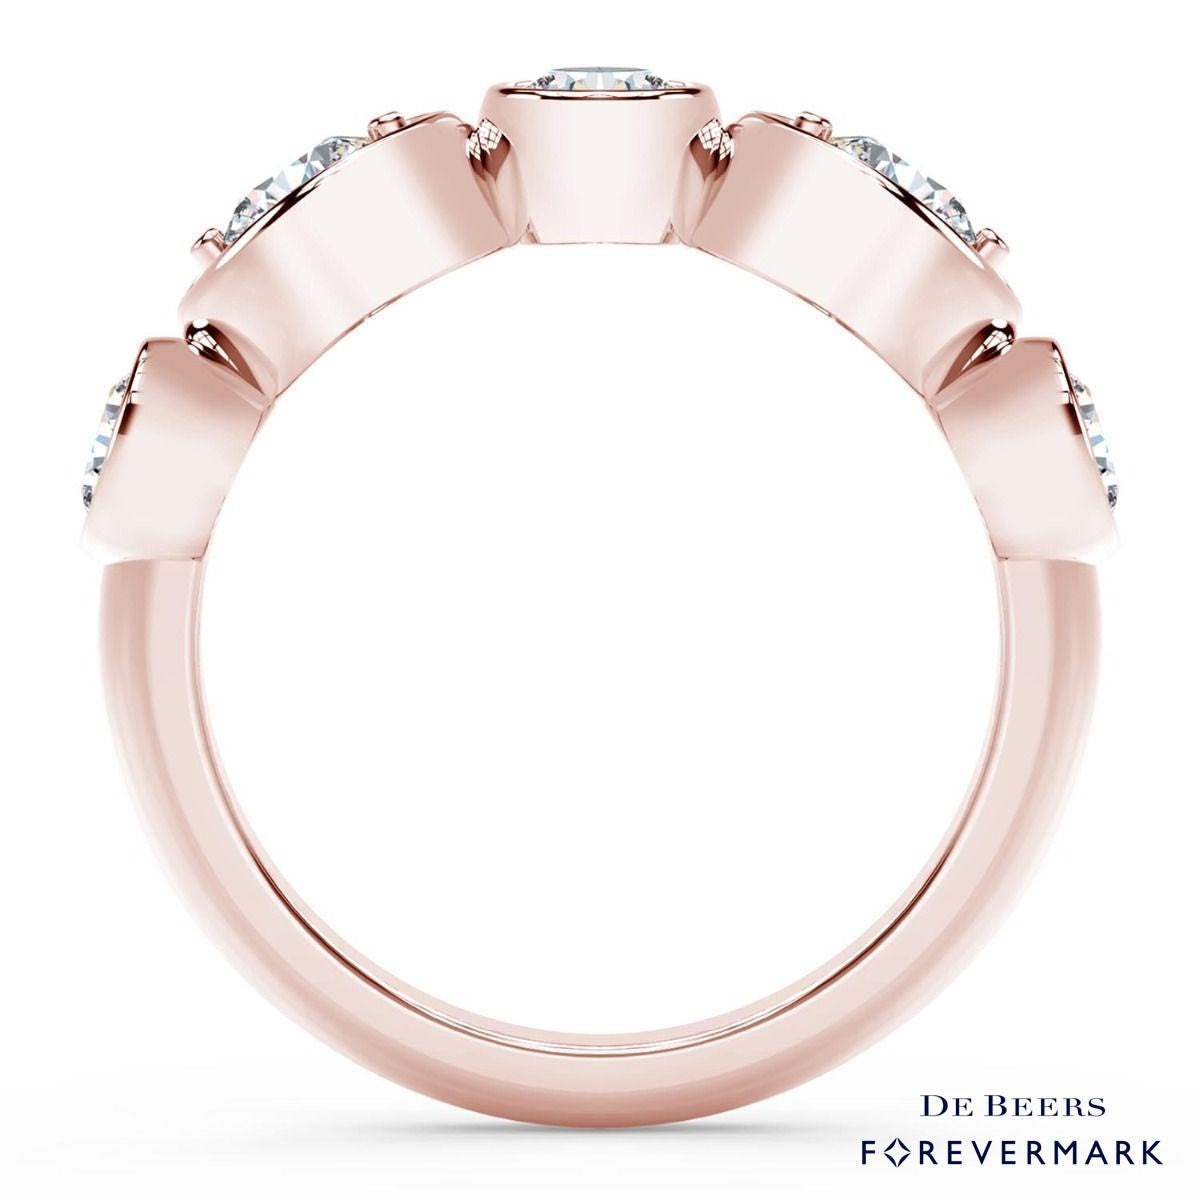 De Beers Forevermark Tribute Collection Diamond Stackable Ring in 18kt Rose Gold (1/2ct tw)